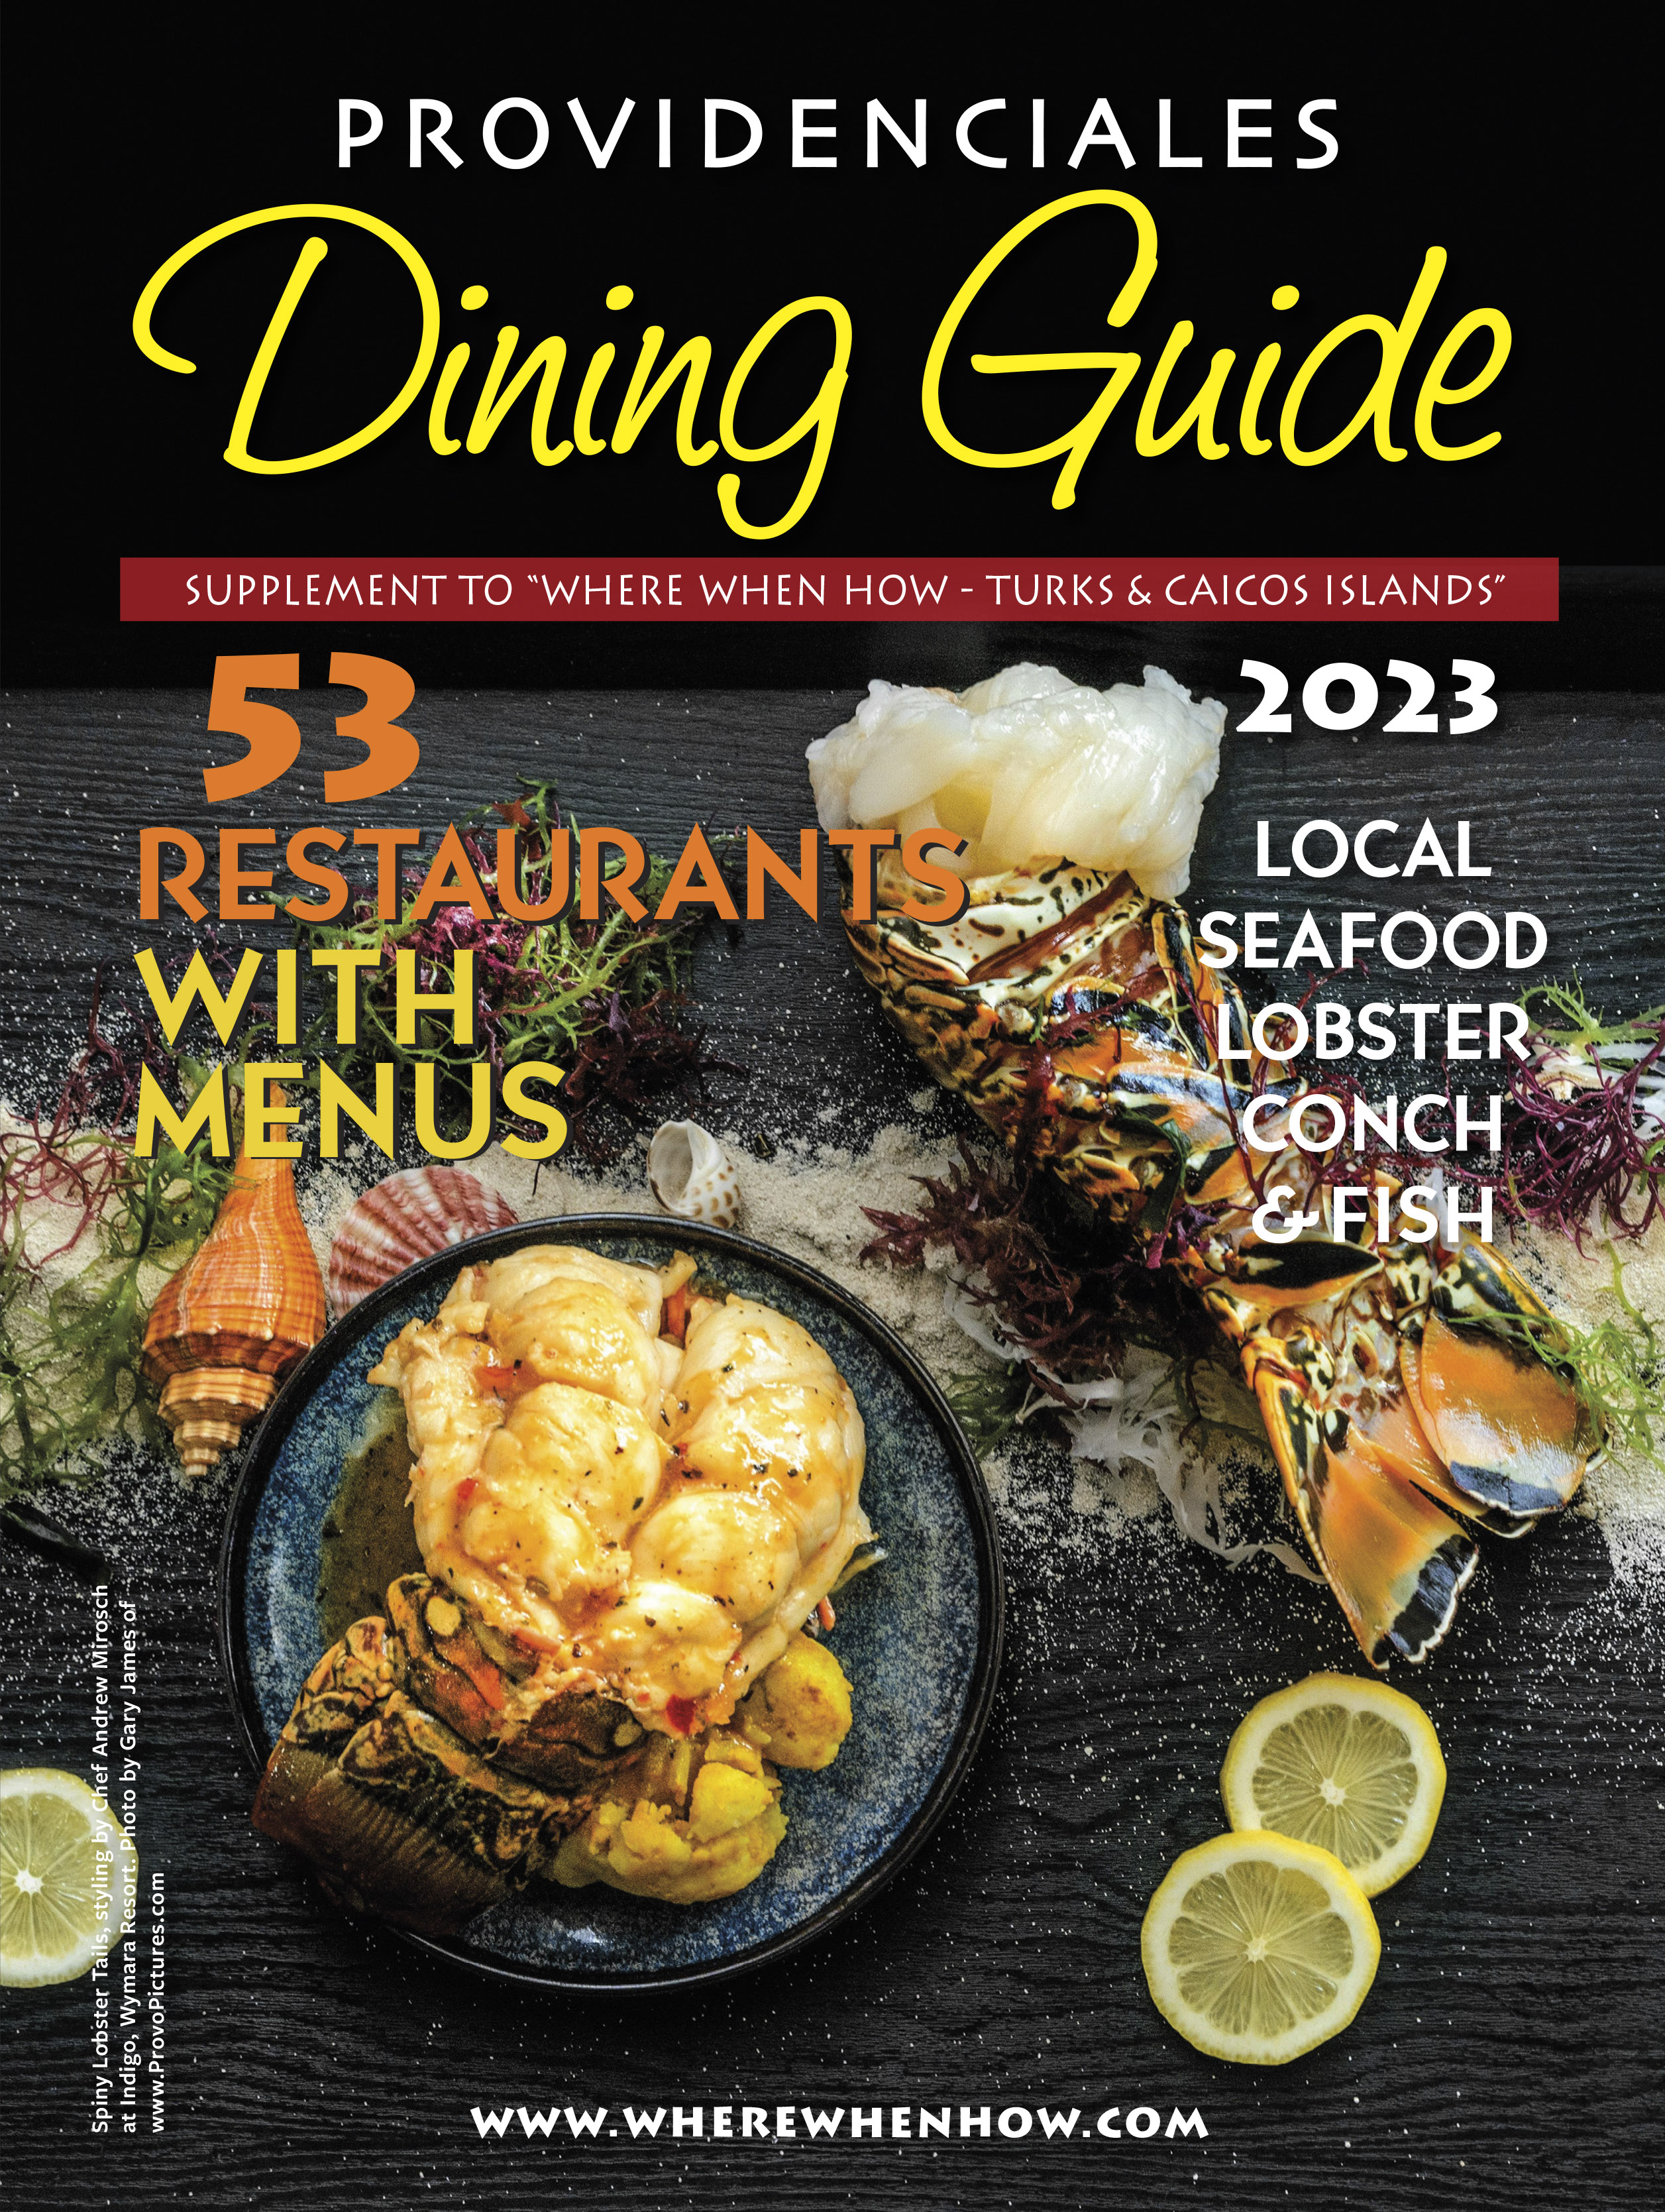 Read our Providenciales Dining Guide 2023 and plan your mouth-watering Turks and Caicos dining experience!